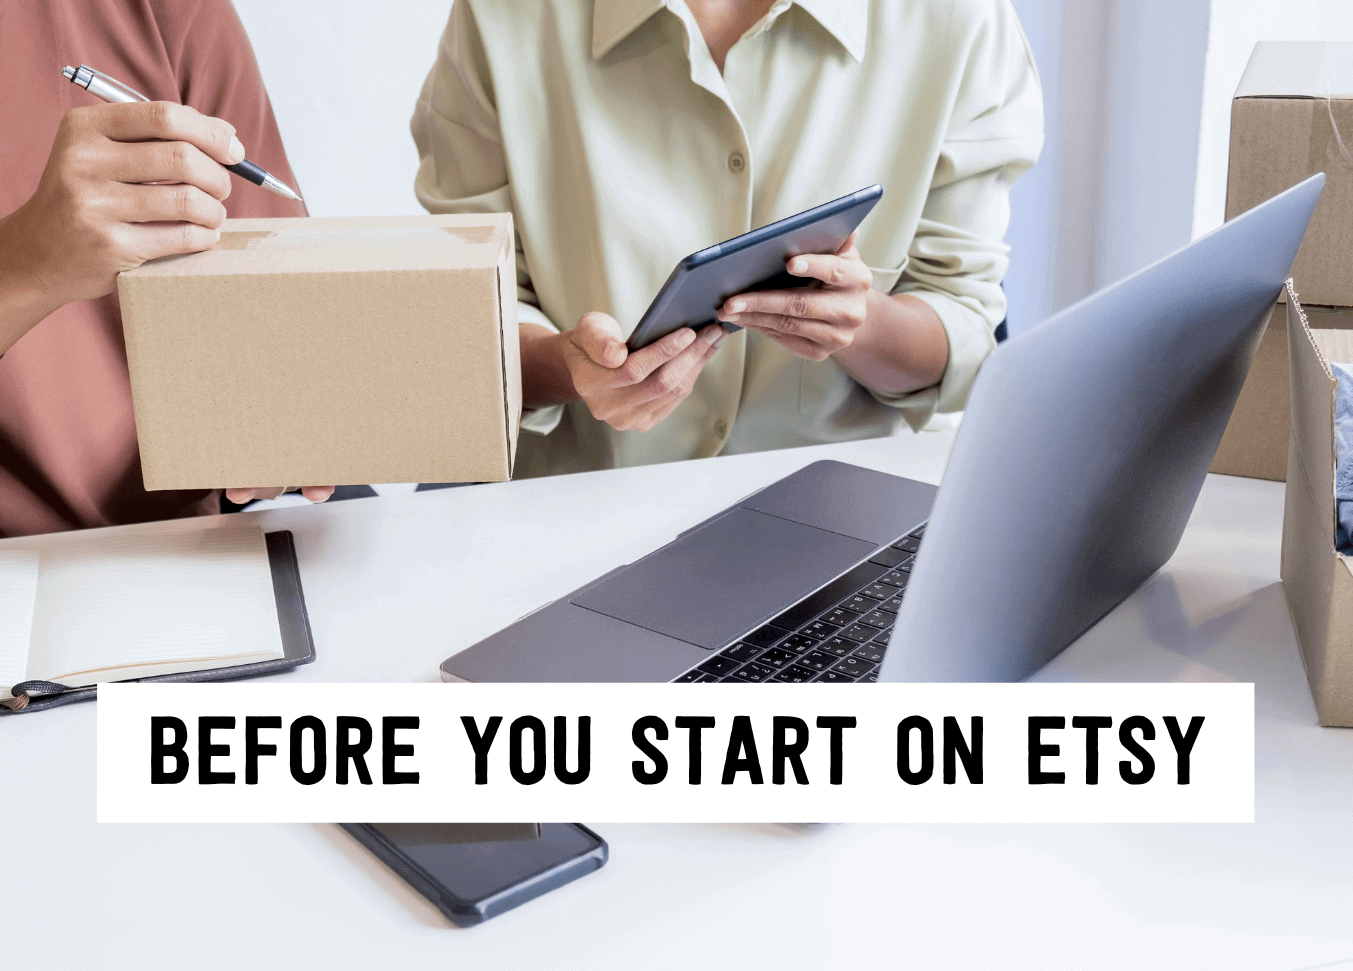 Before you start on etsy | Tizzit.co - start and grow a successful handmade business